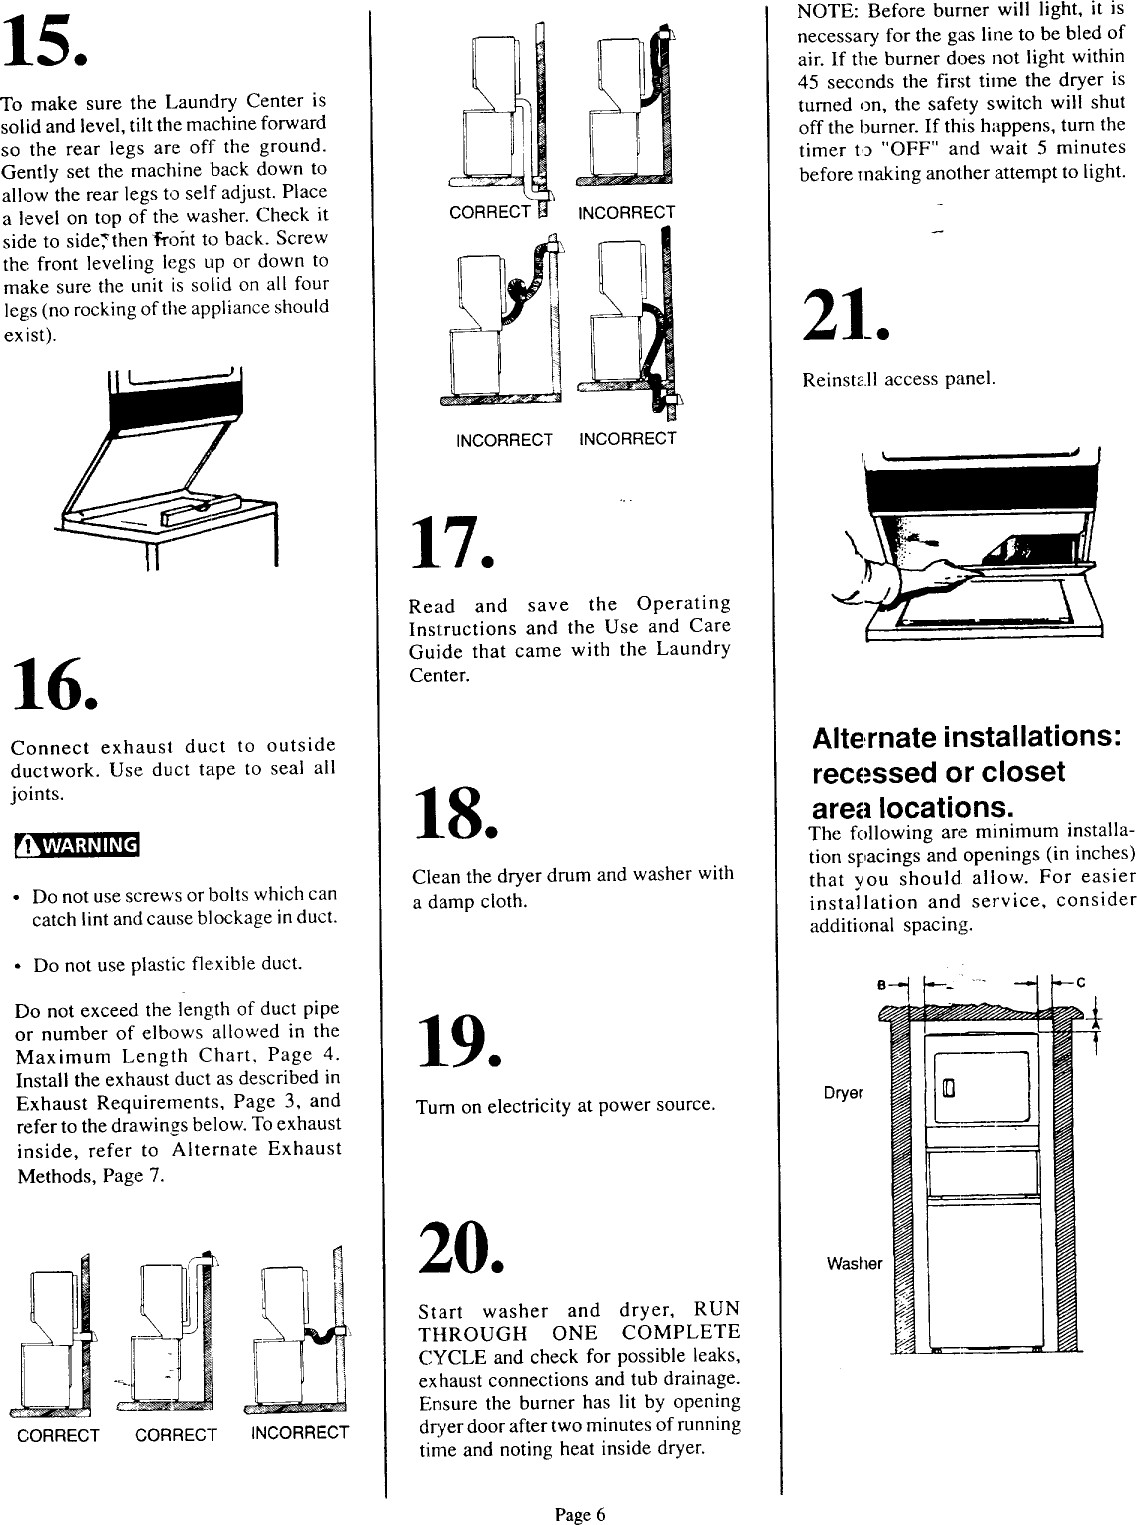 Page 6 of 9 - KENMORE  Laundry Centers Manual 98010139